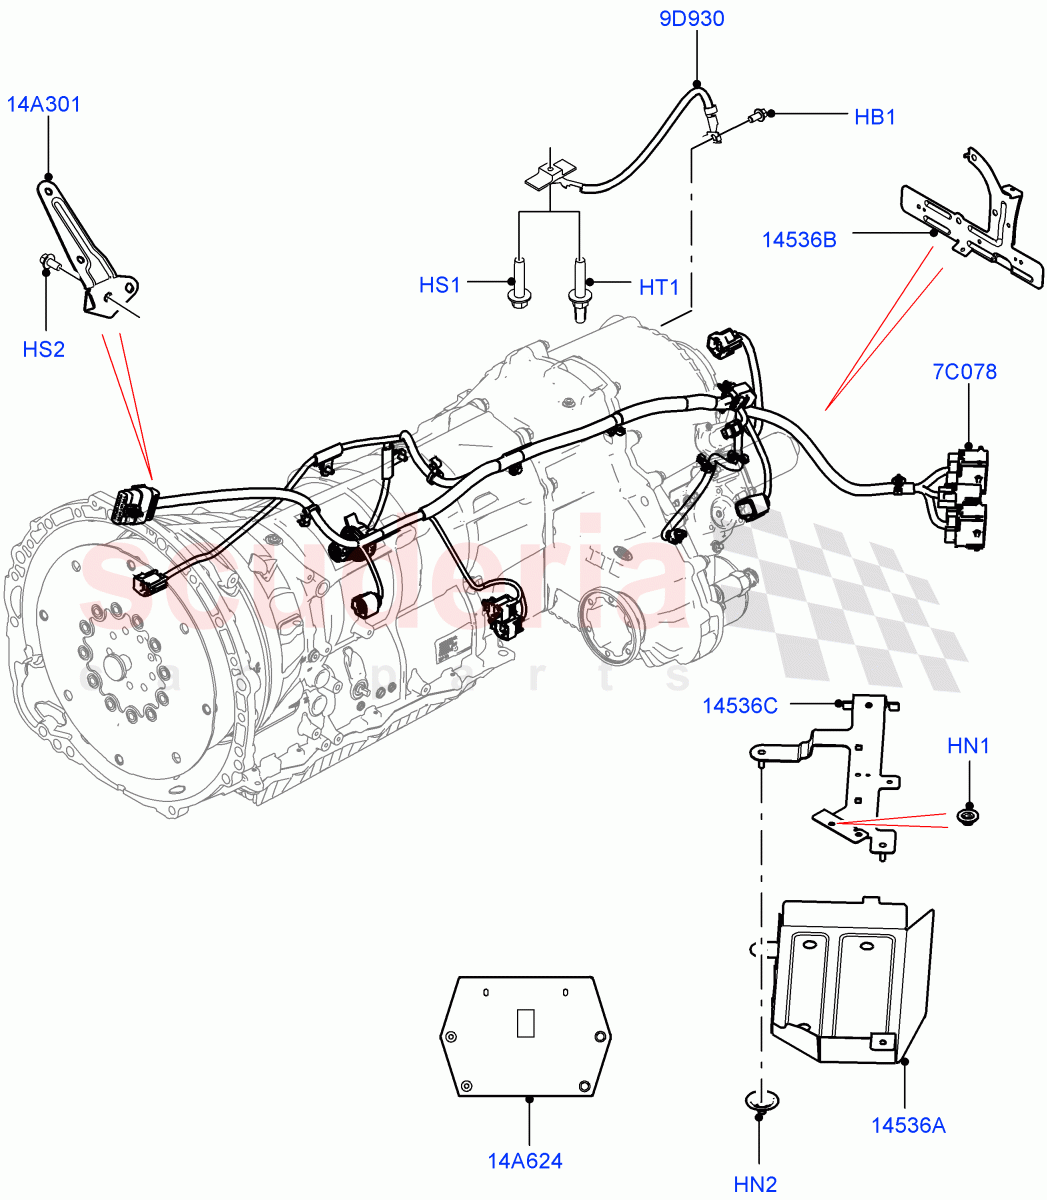 Electrical Wiring - Engine And Dash(Transmission)((V)TOFA999999) of Land Rover Land Rover Range Rover Sport (2014+) [3.0 I6 Turbo Diesel AJ20D6]